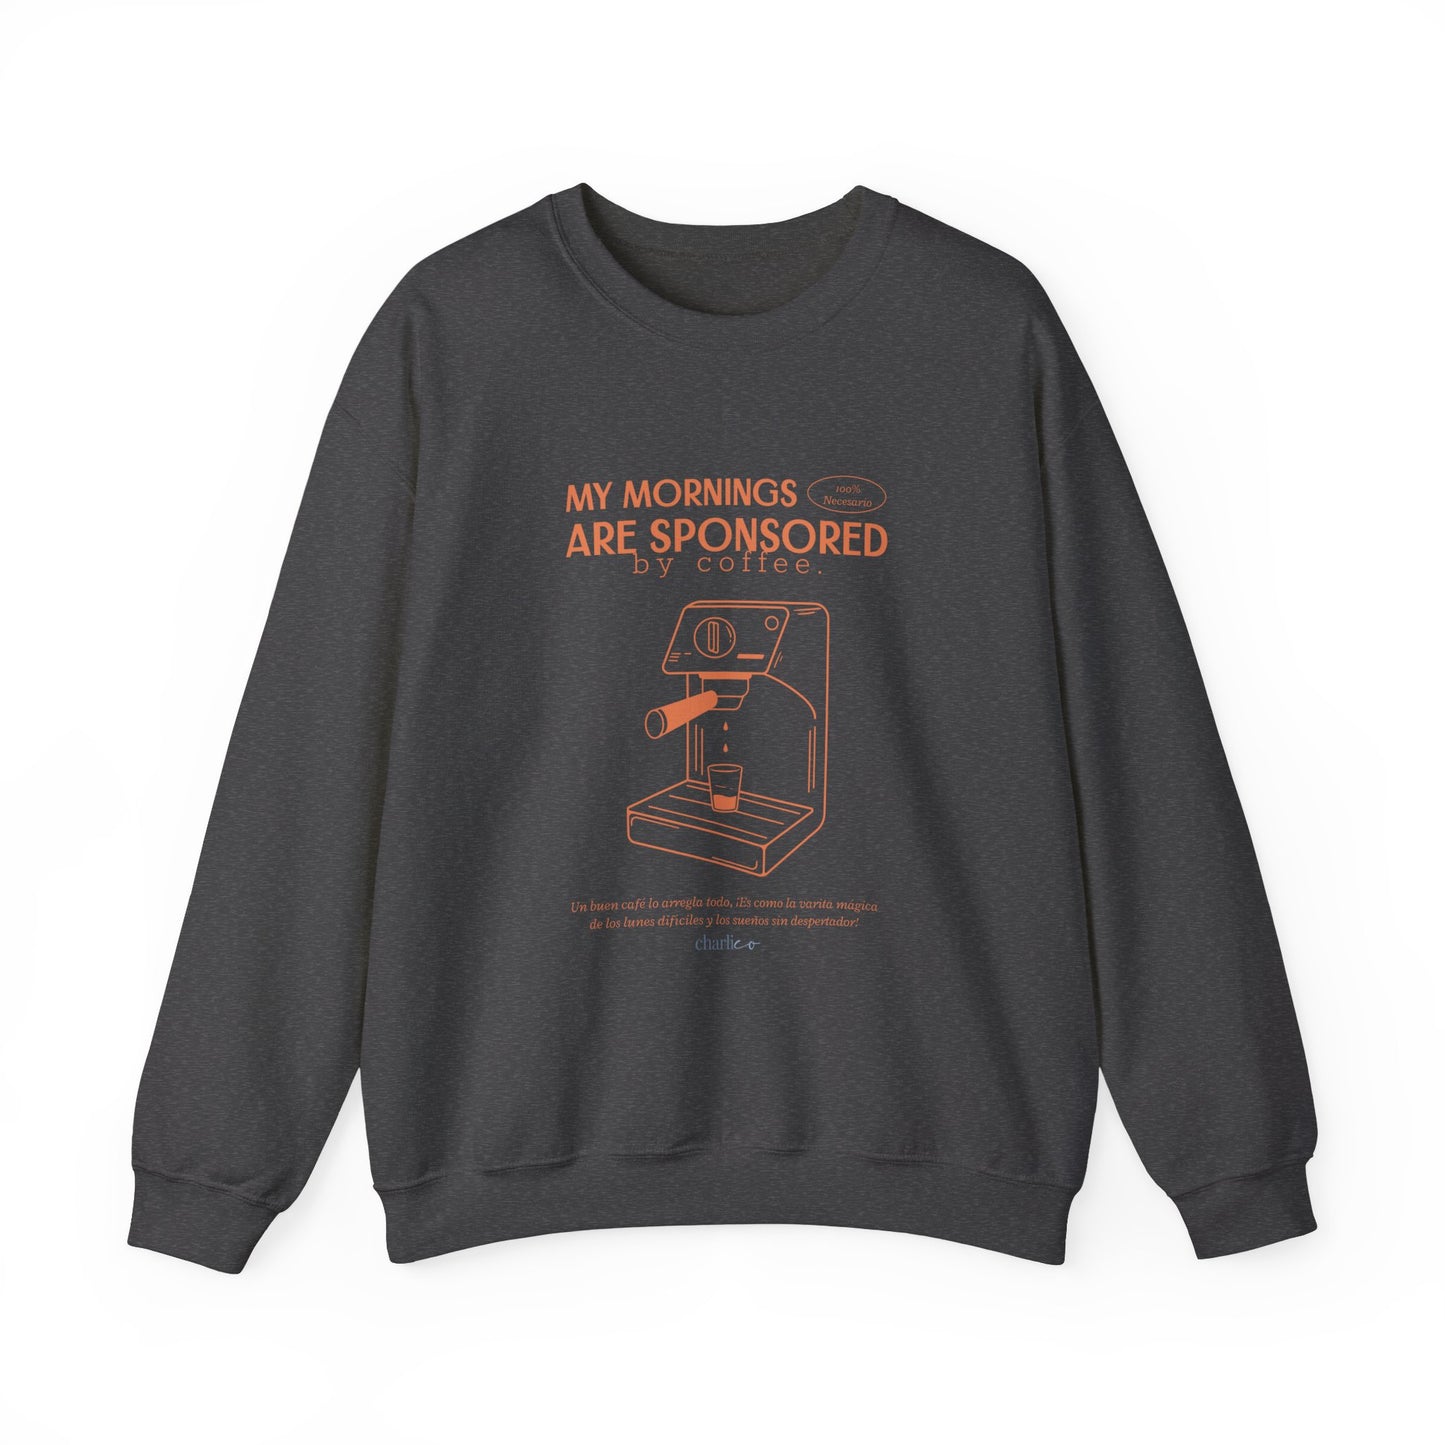 Crewneck sweatshirt -my morning are sponsored by coffee- for adults